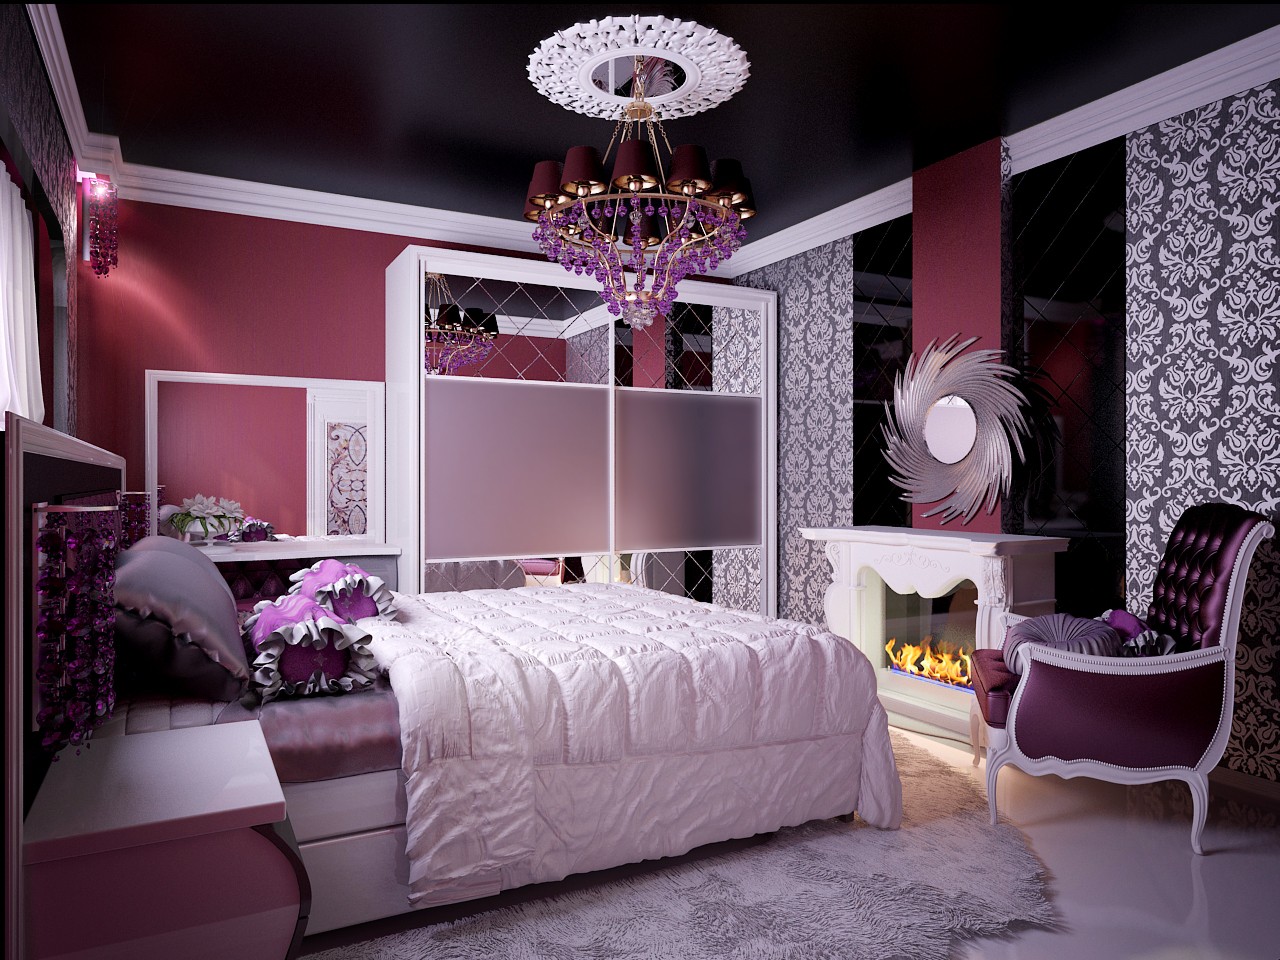 Bedroom Decorating Ideas For Young Women